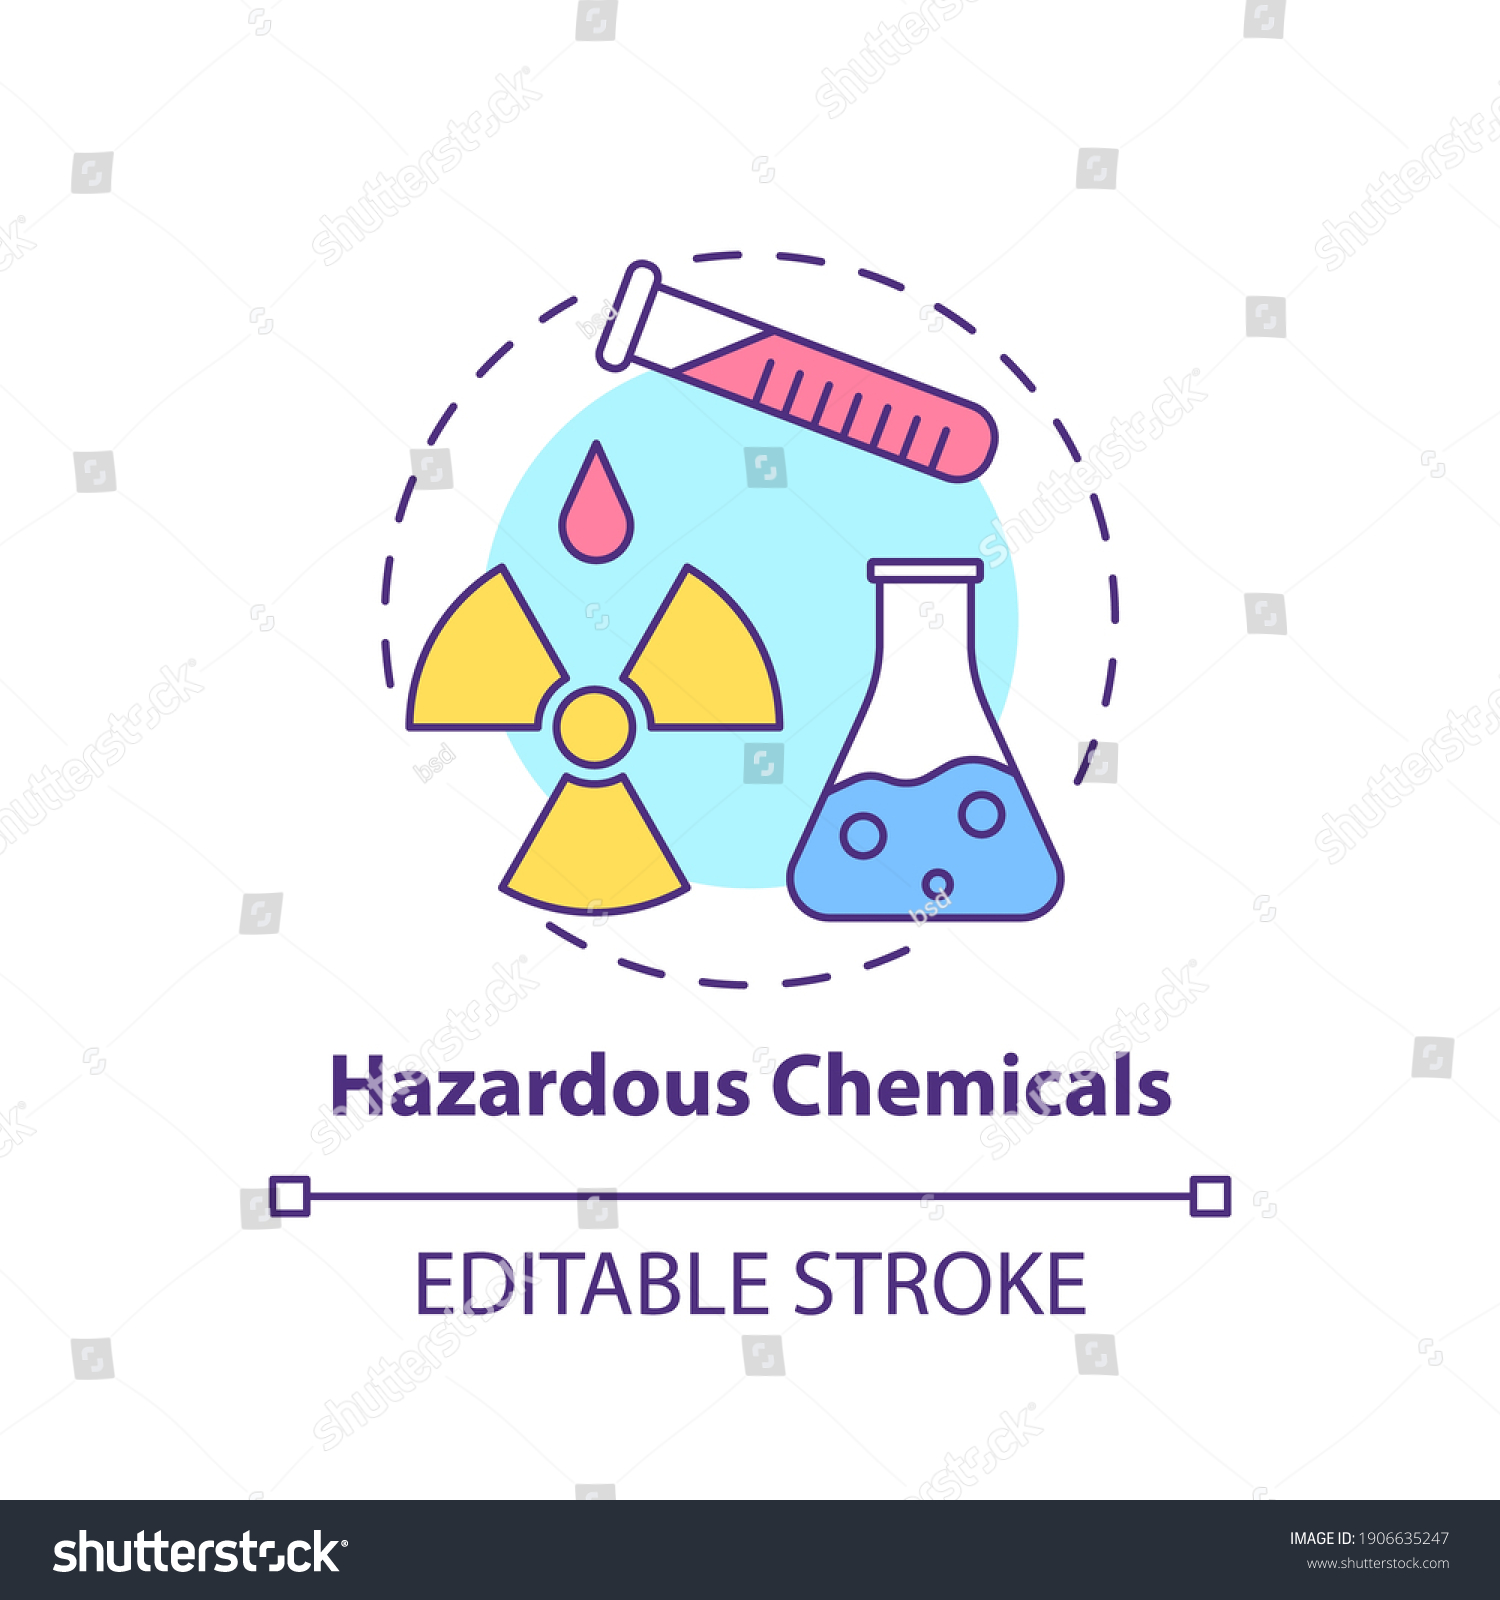 Hazardous Chemicals Concept Icon Workplace Safety Stock Vector Royalty